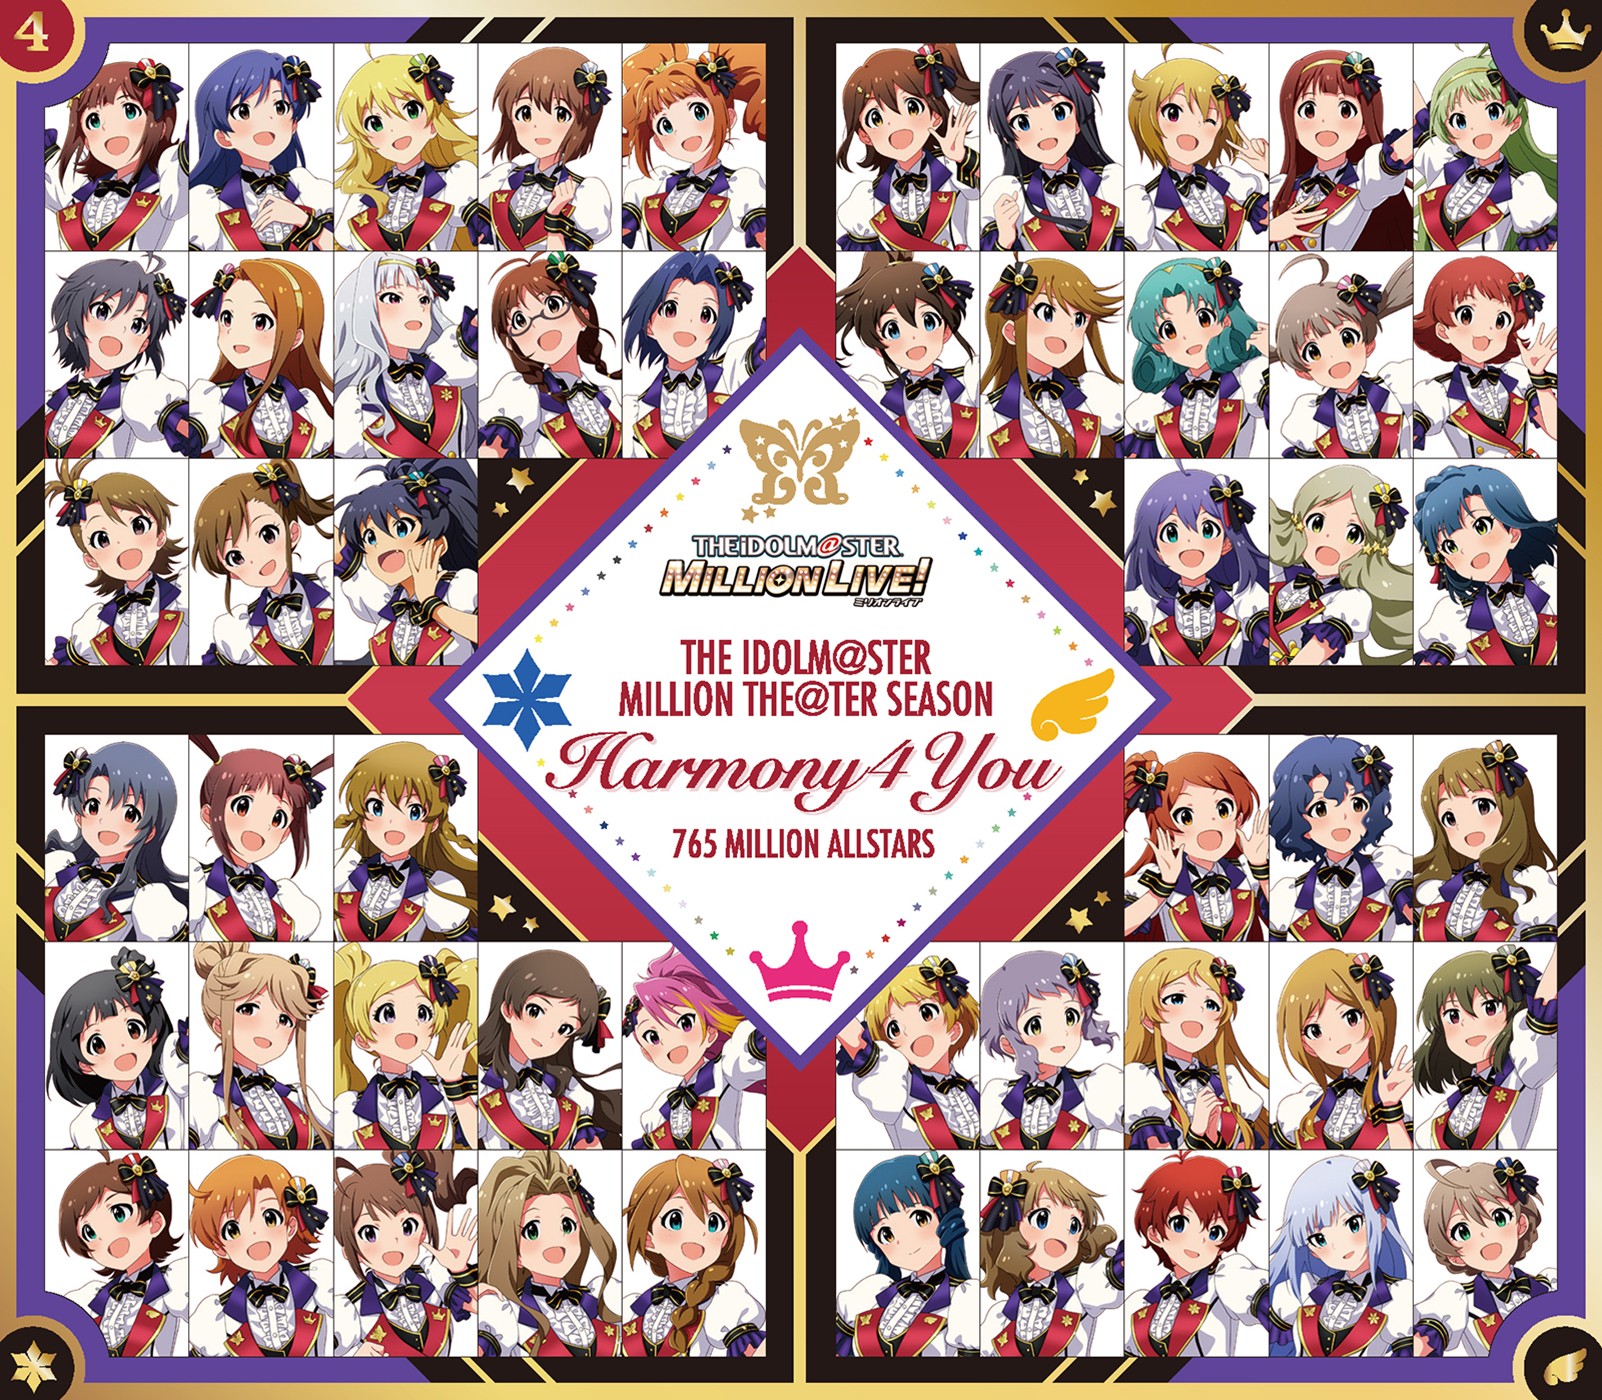 THE IDOLM@STER – Harmony 4 You [24bit Lossless + MP3 320 / WEB] [2021.07.13]